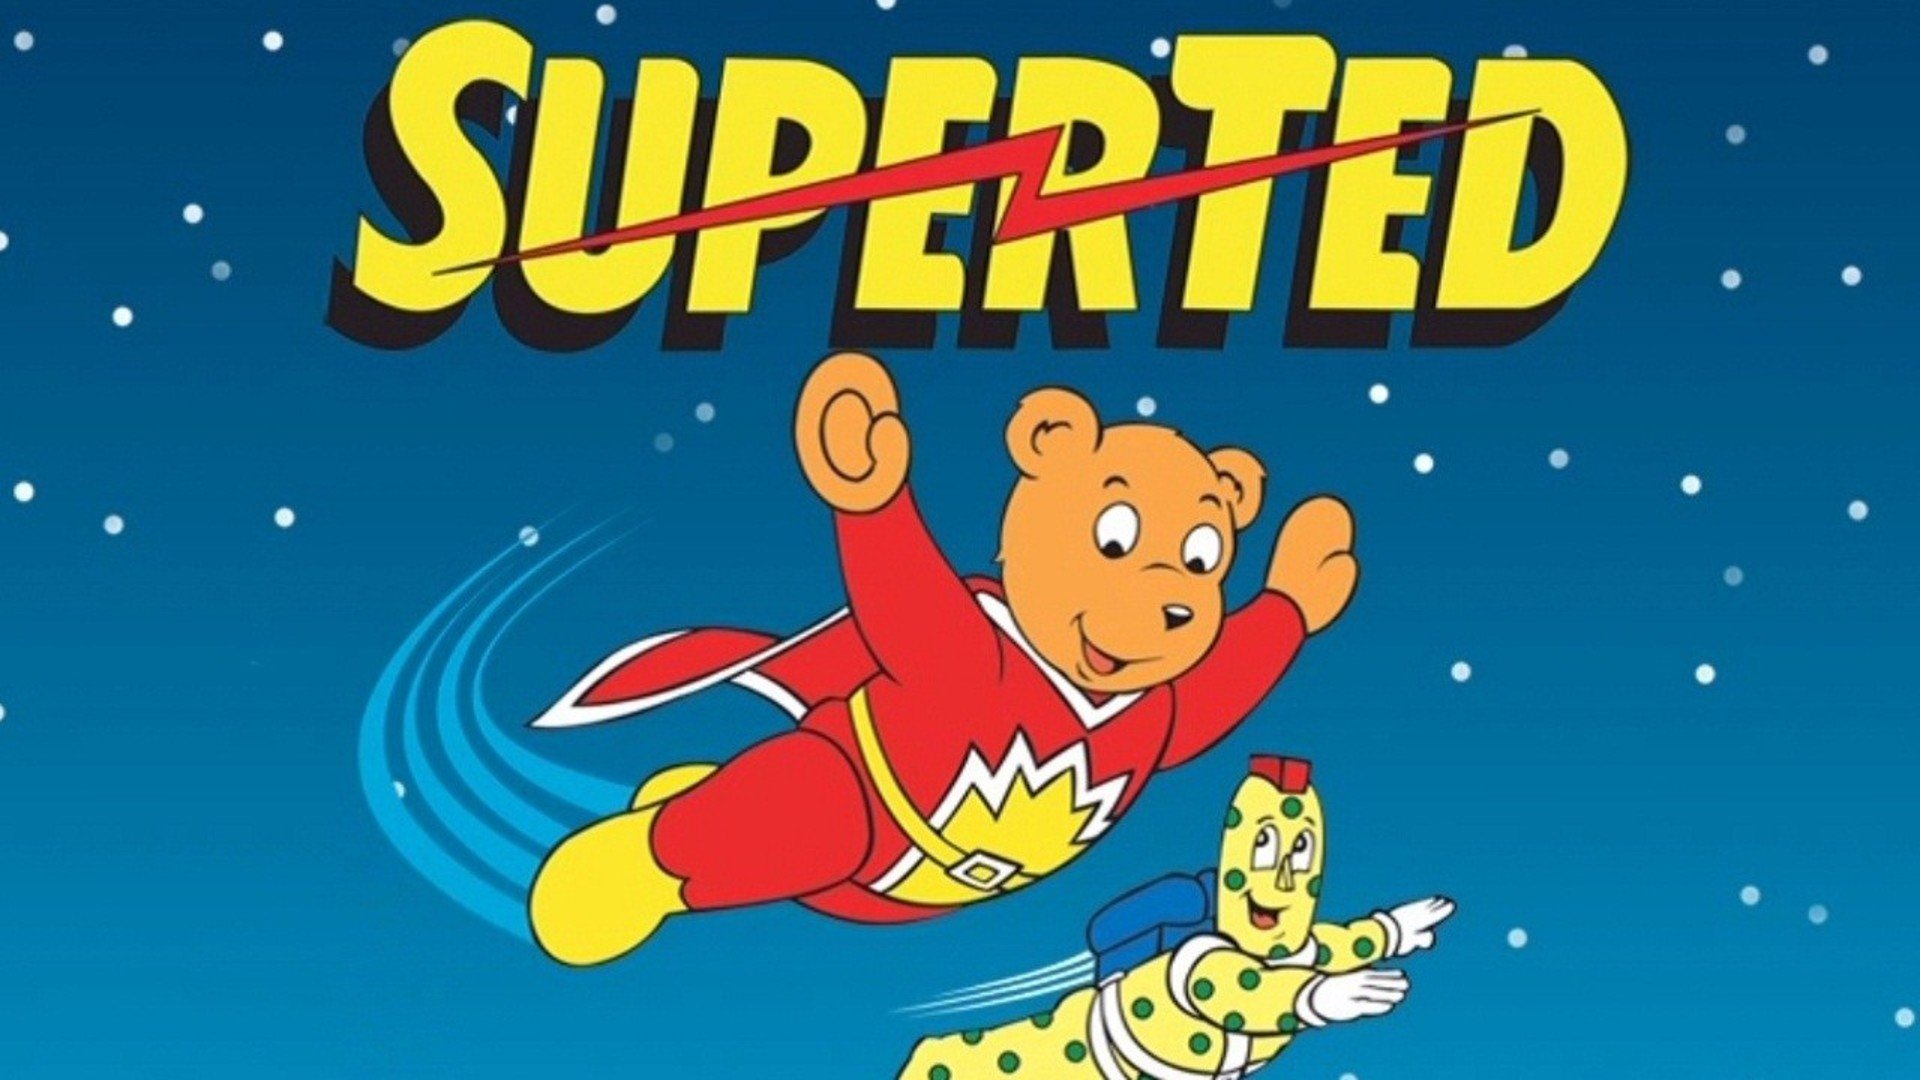 SuperTed Wallpapers - Wallpaper Cave